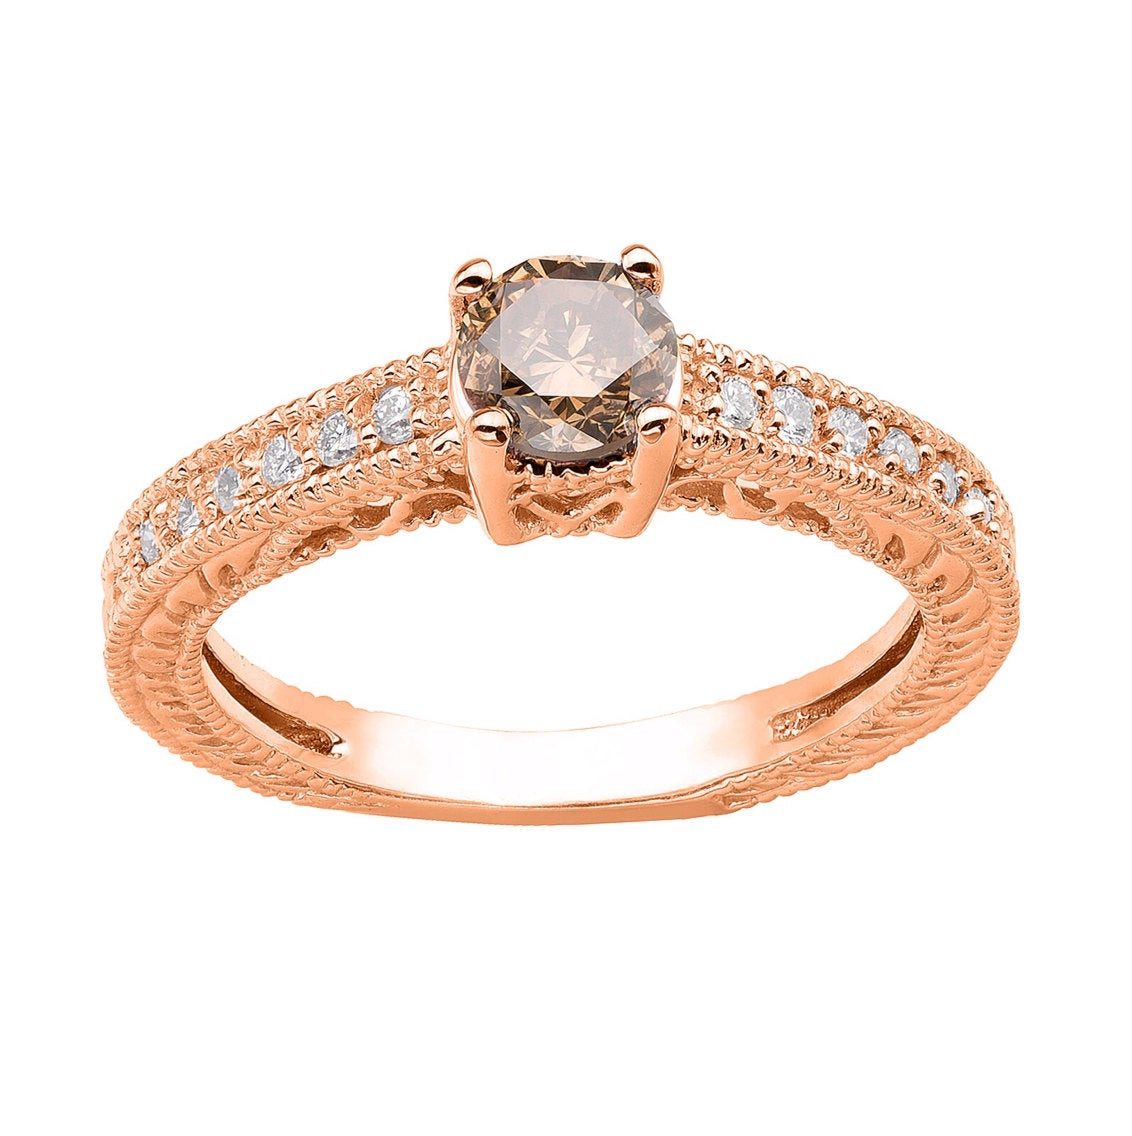 Rose Gold Engagement Rings With Chocolate Diamonds
 Fancy Champagne Brown Diamond Engagement Ring 14K Rose Gold